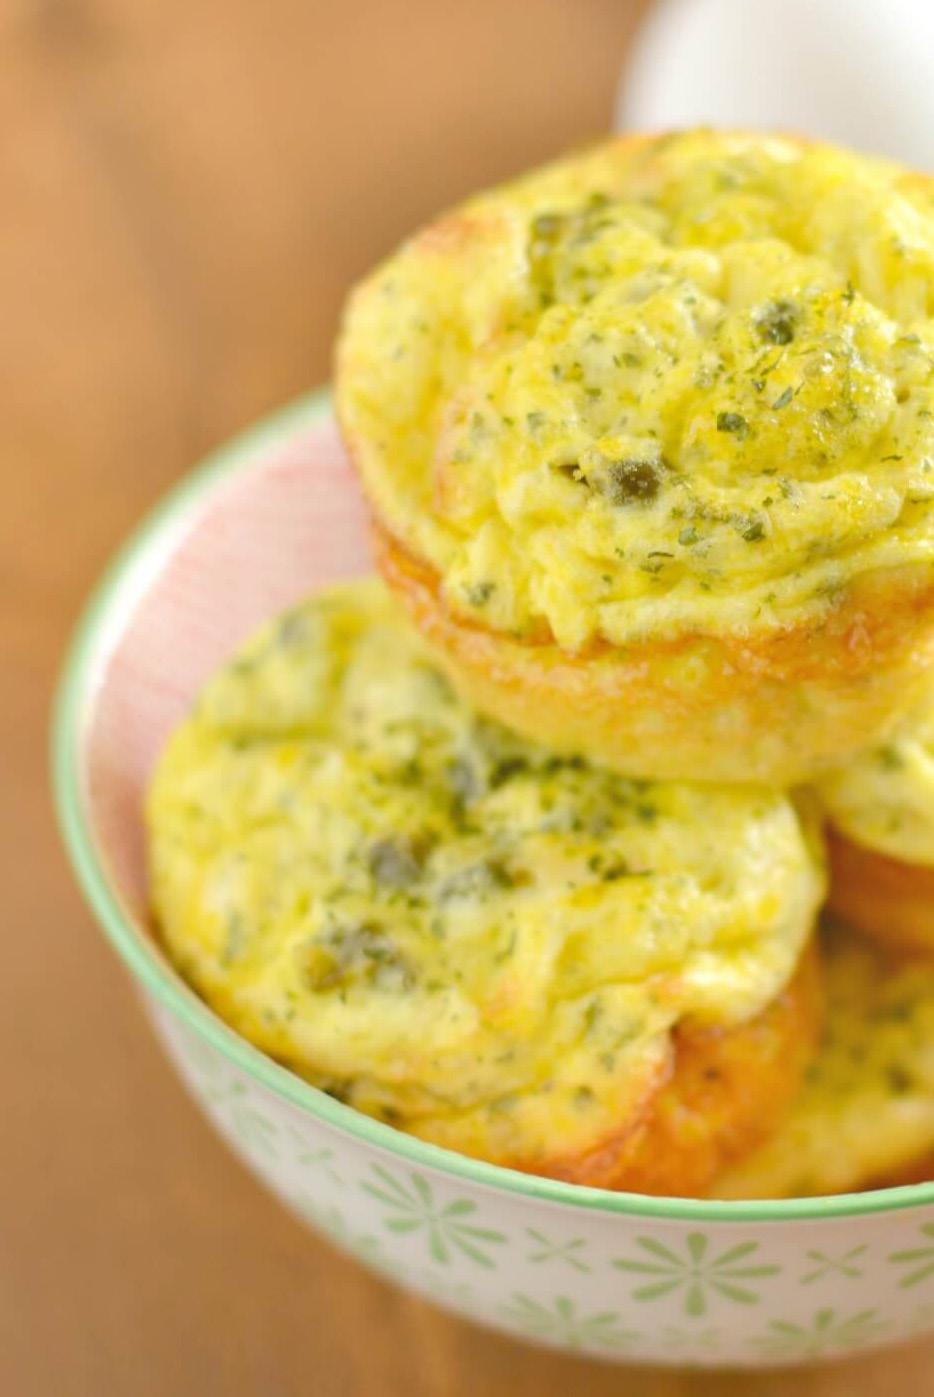 LOX AND CAPER Egg Muffins Prep Time: 5 minutes Cook Time: 25 minutes Serves: 6 2 large eggs 4 large egg whites 1/3 cup unsweetened coconut milk 2 T capers ¼ cup lox, sliced into quarter-inch pieces ½